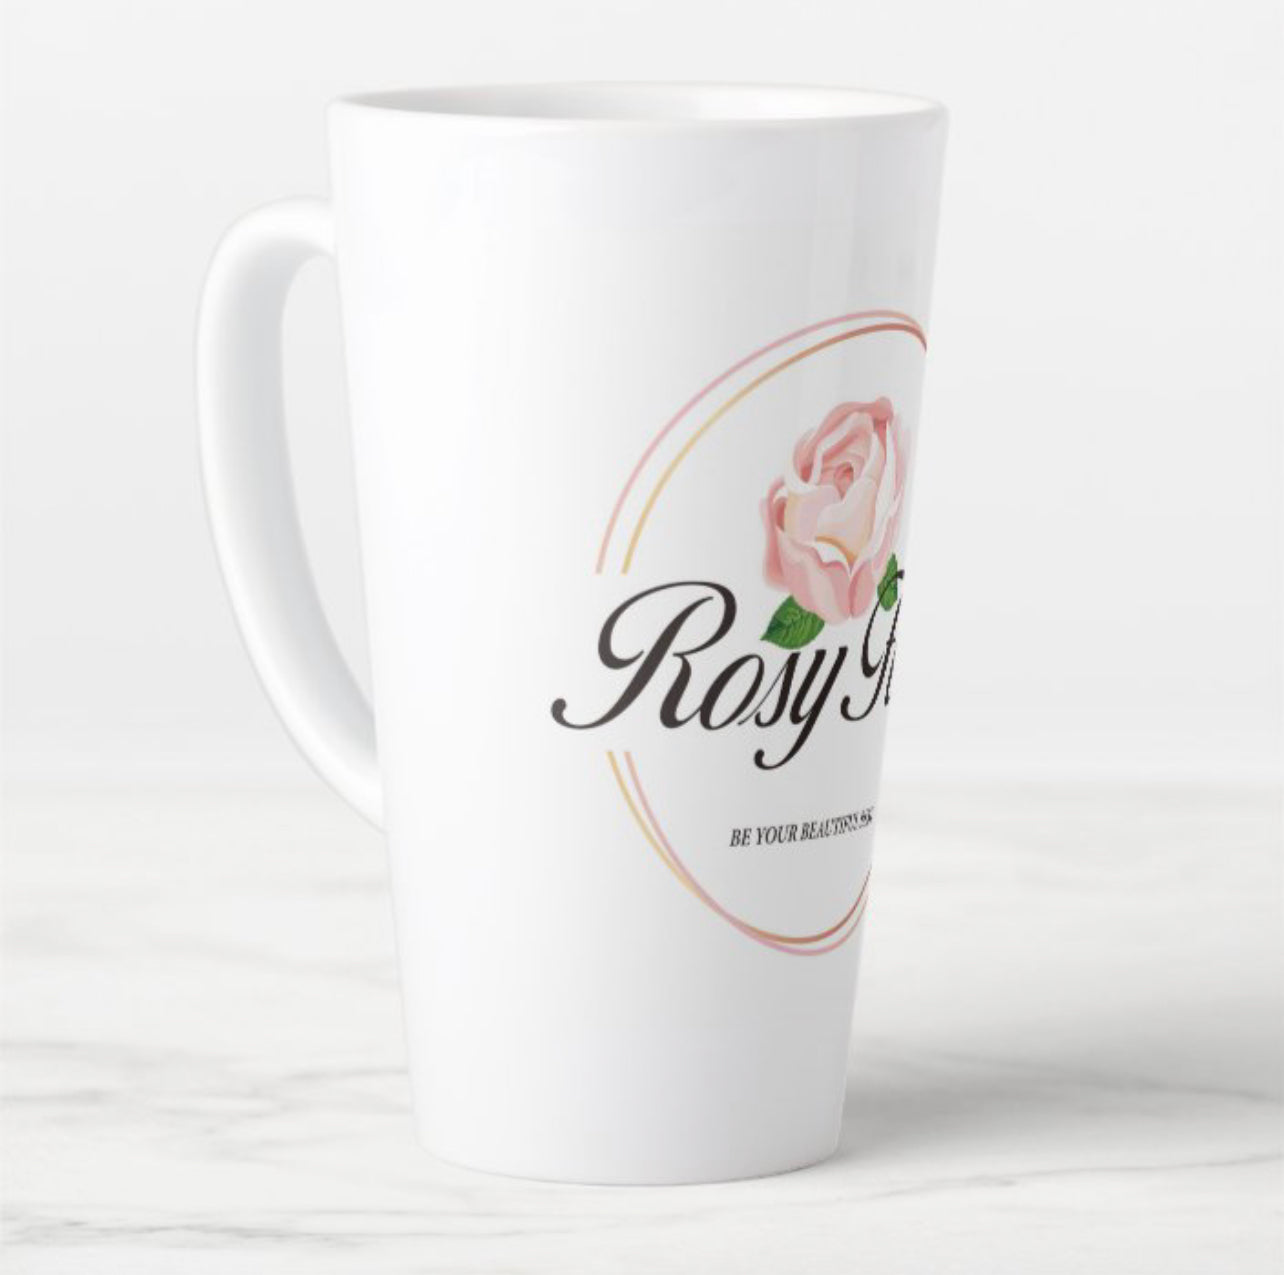 RosyFina Cups